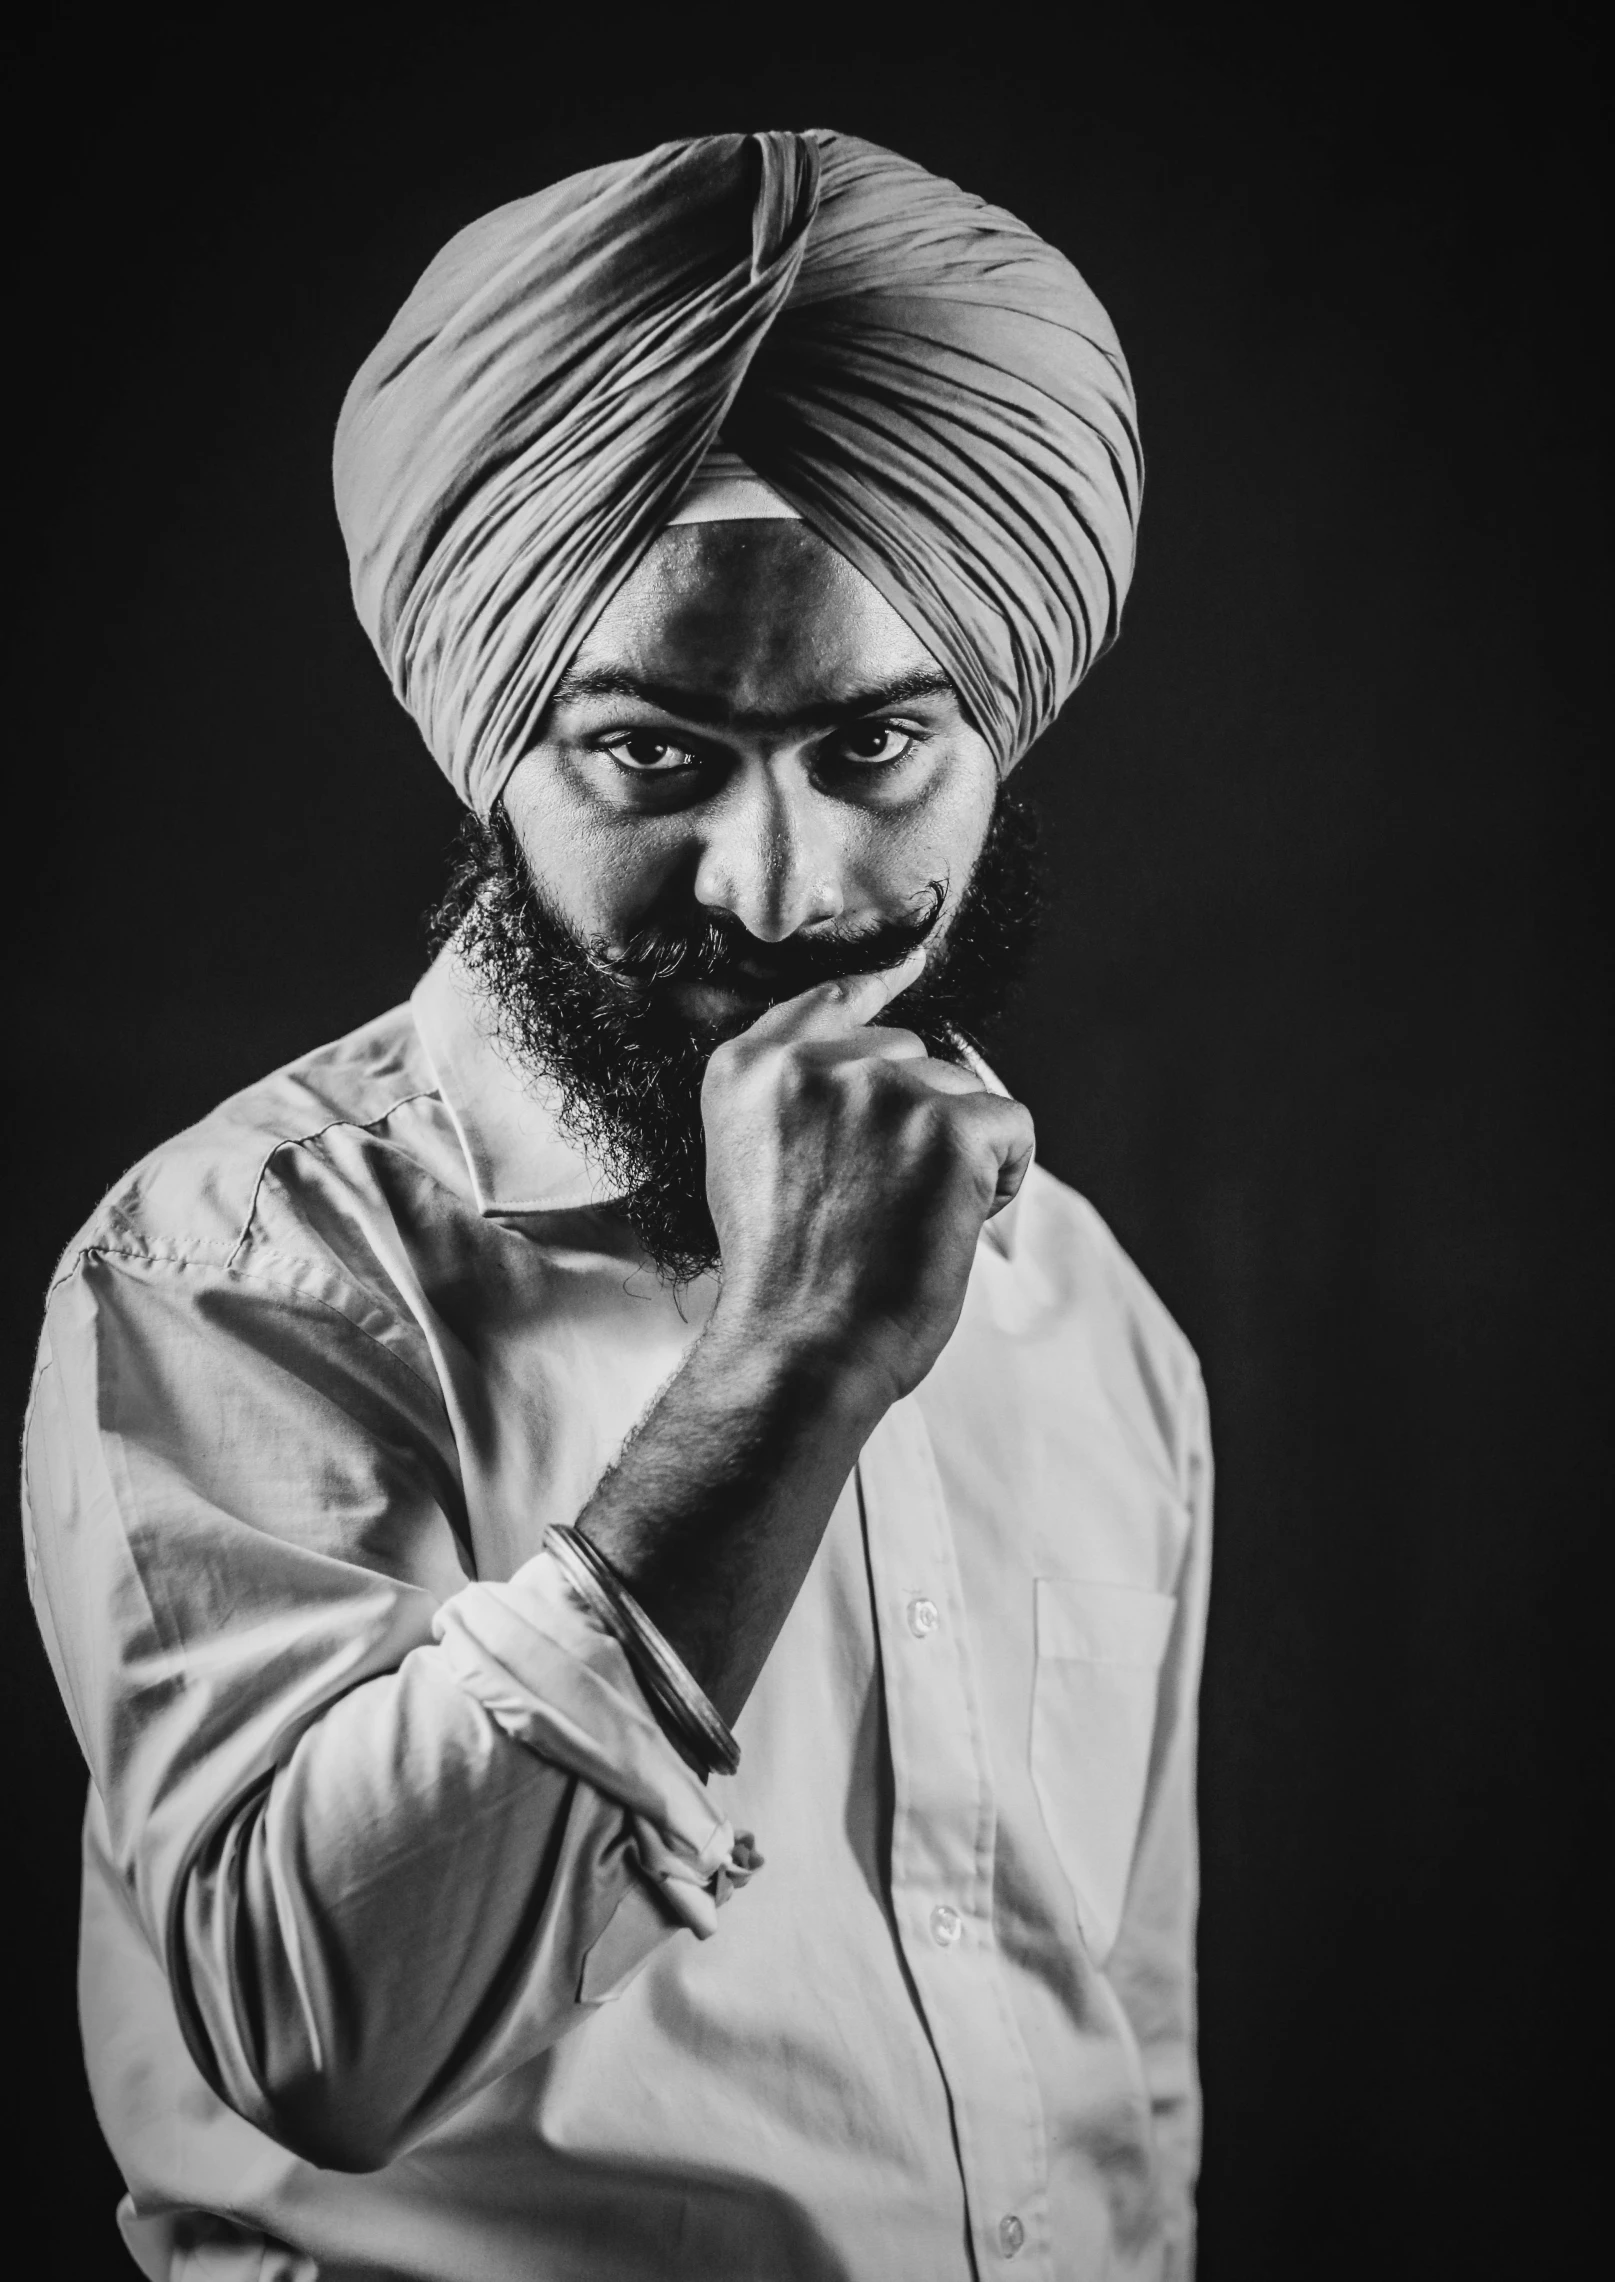 a man in a turban is posing for the camera